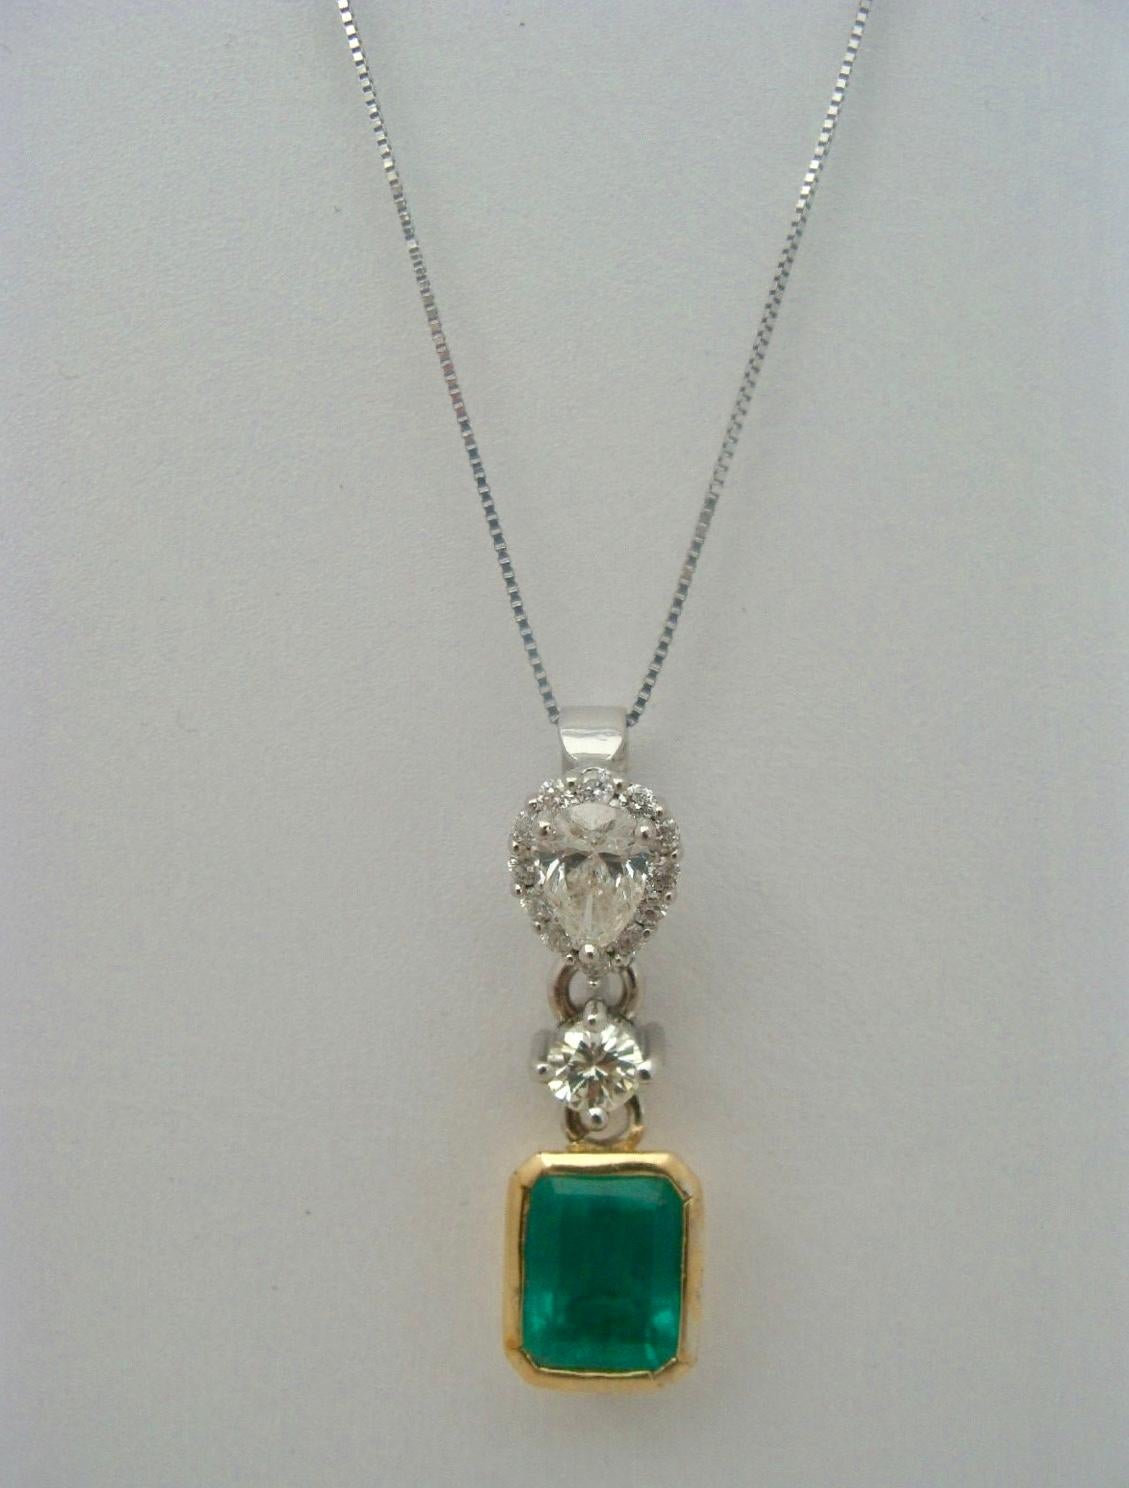 Gorgeous Pendant is made of Solid 18K White & Yellow Gold
Featuring a Fine Natural Colombian Emerald Emerald Cut Approx. Weight 3.00 Carats AAA Vivid Medium Green Fully Saturated Excellent Clarity & Transparency Set with Total Diamonds Total approx.